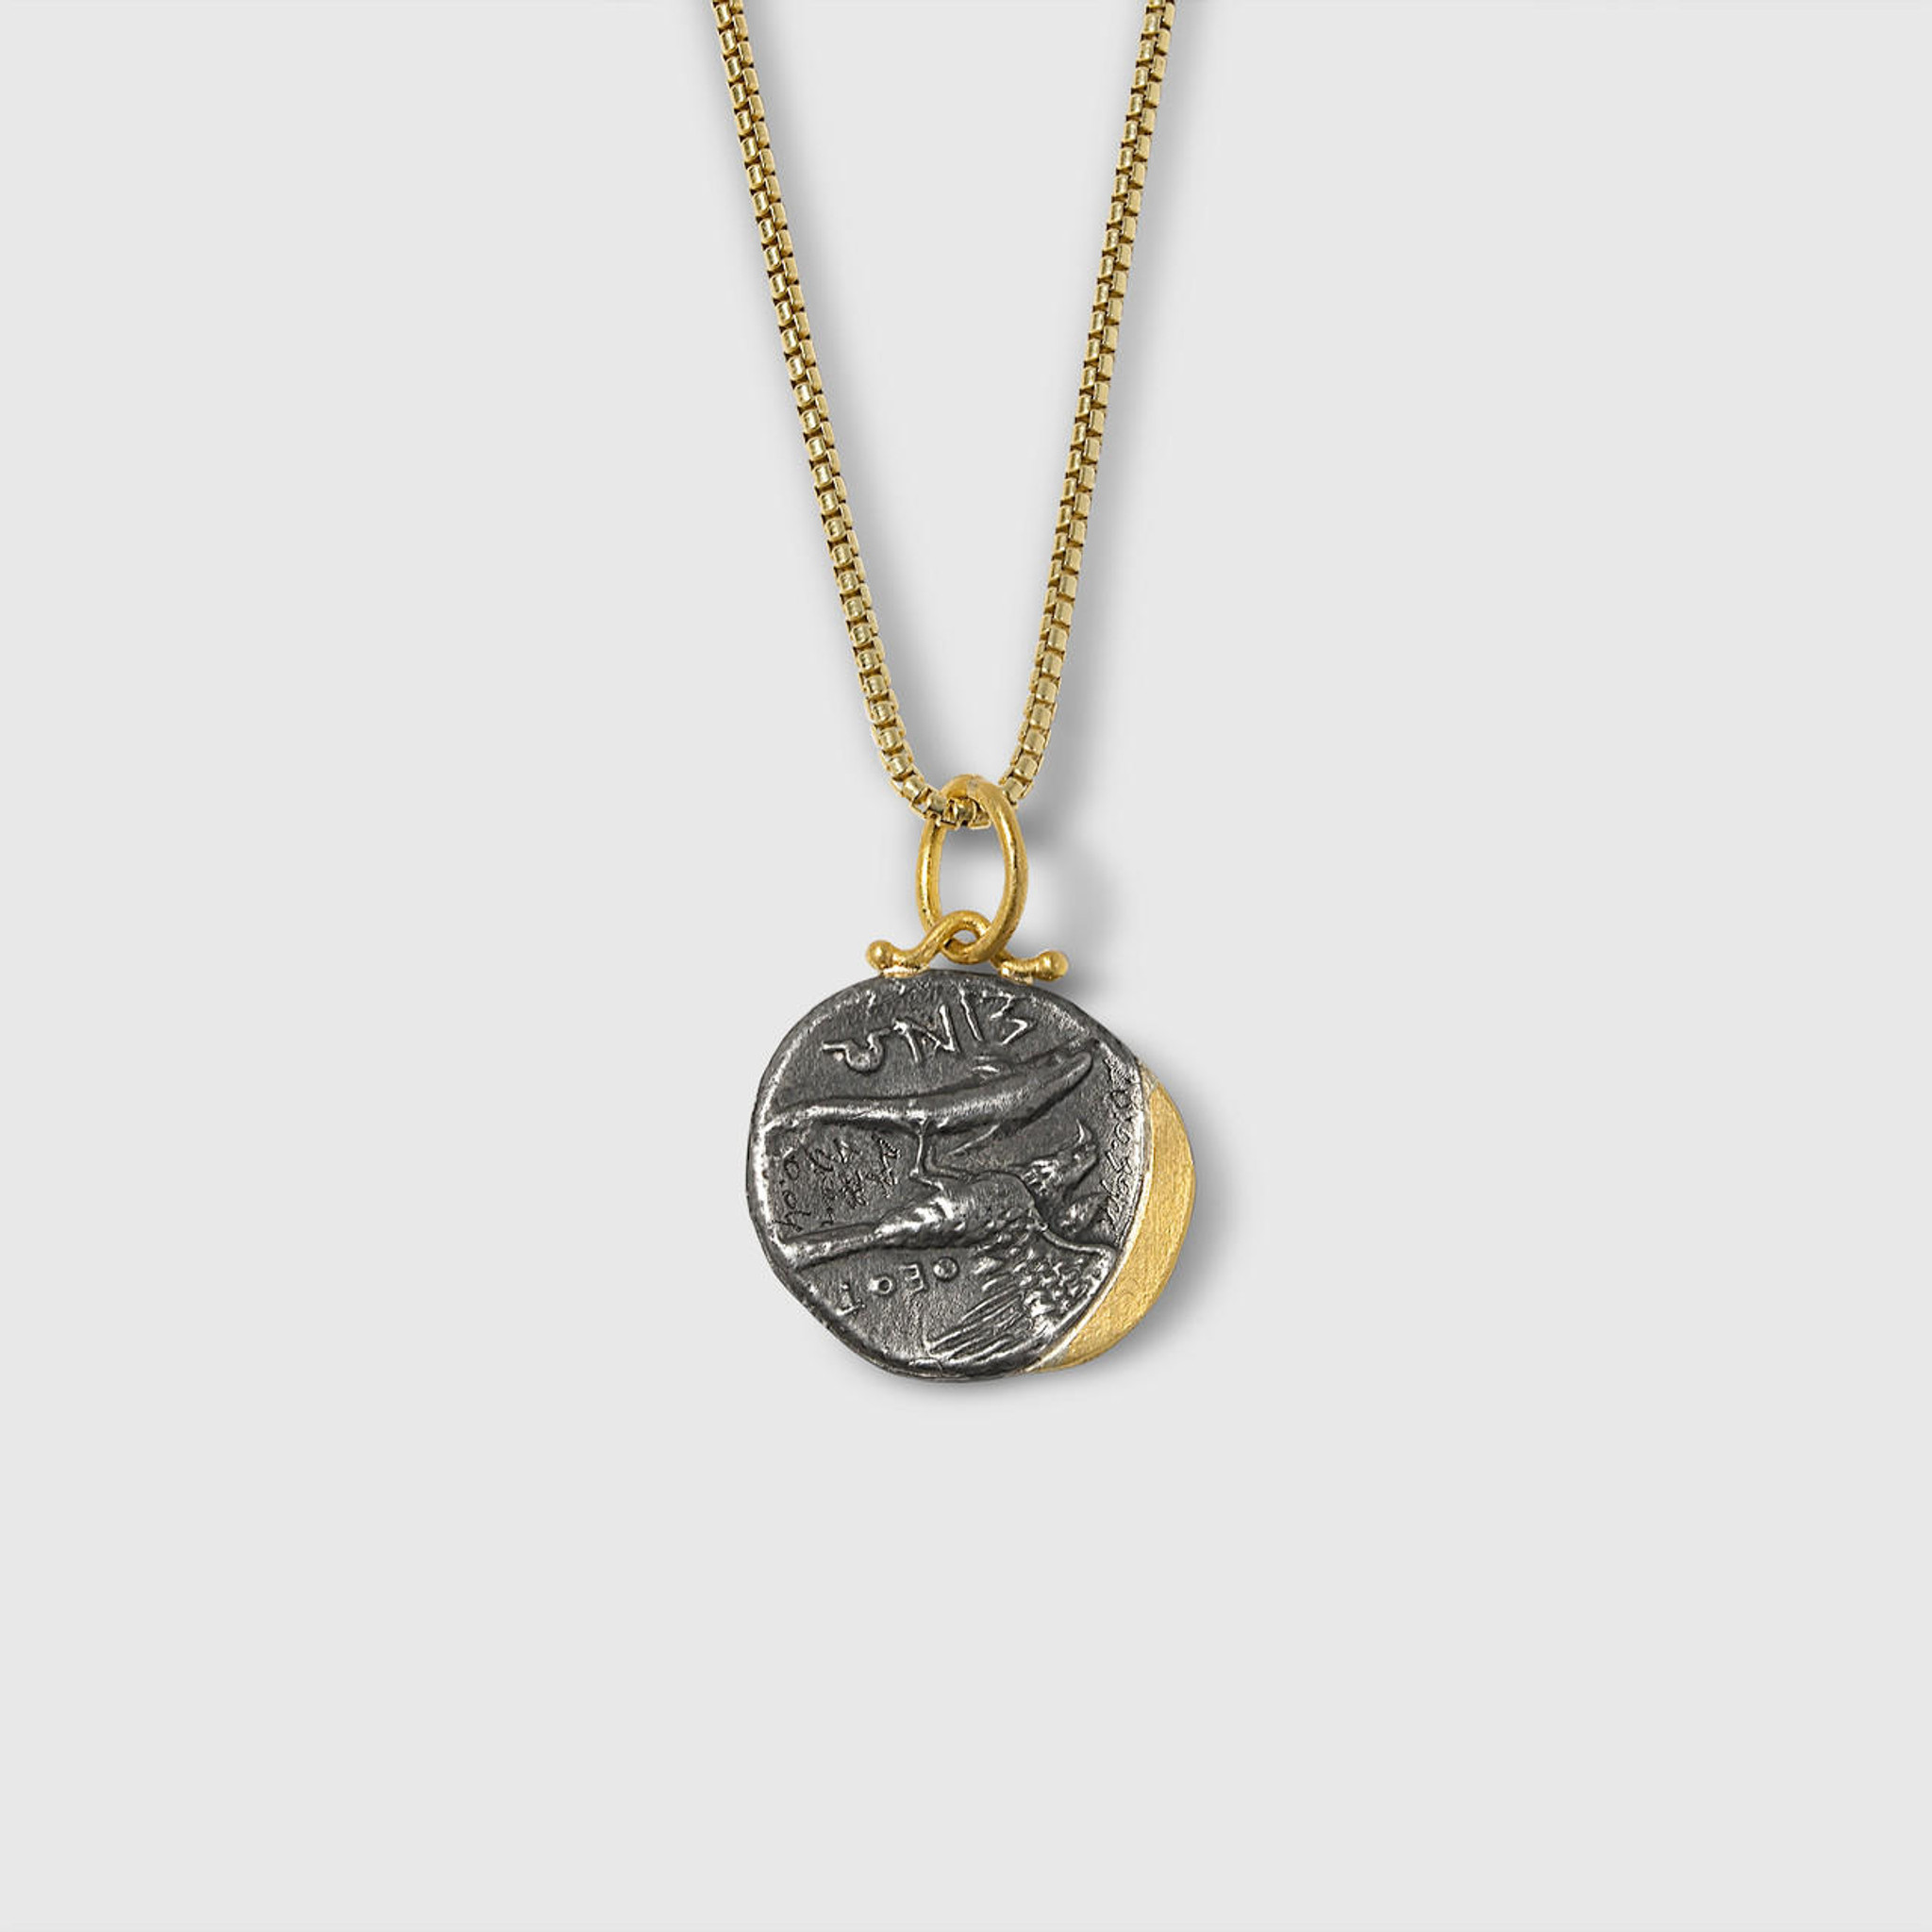 Prehistoric Works Water Nymph, Synope, Pendant Necklace Charm Coin Amulet with Diamonds, 24kt Gold and Silver 